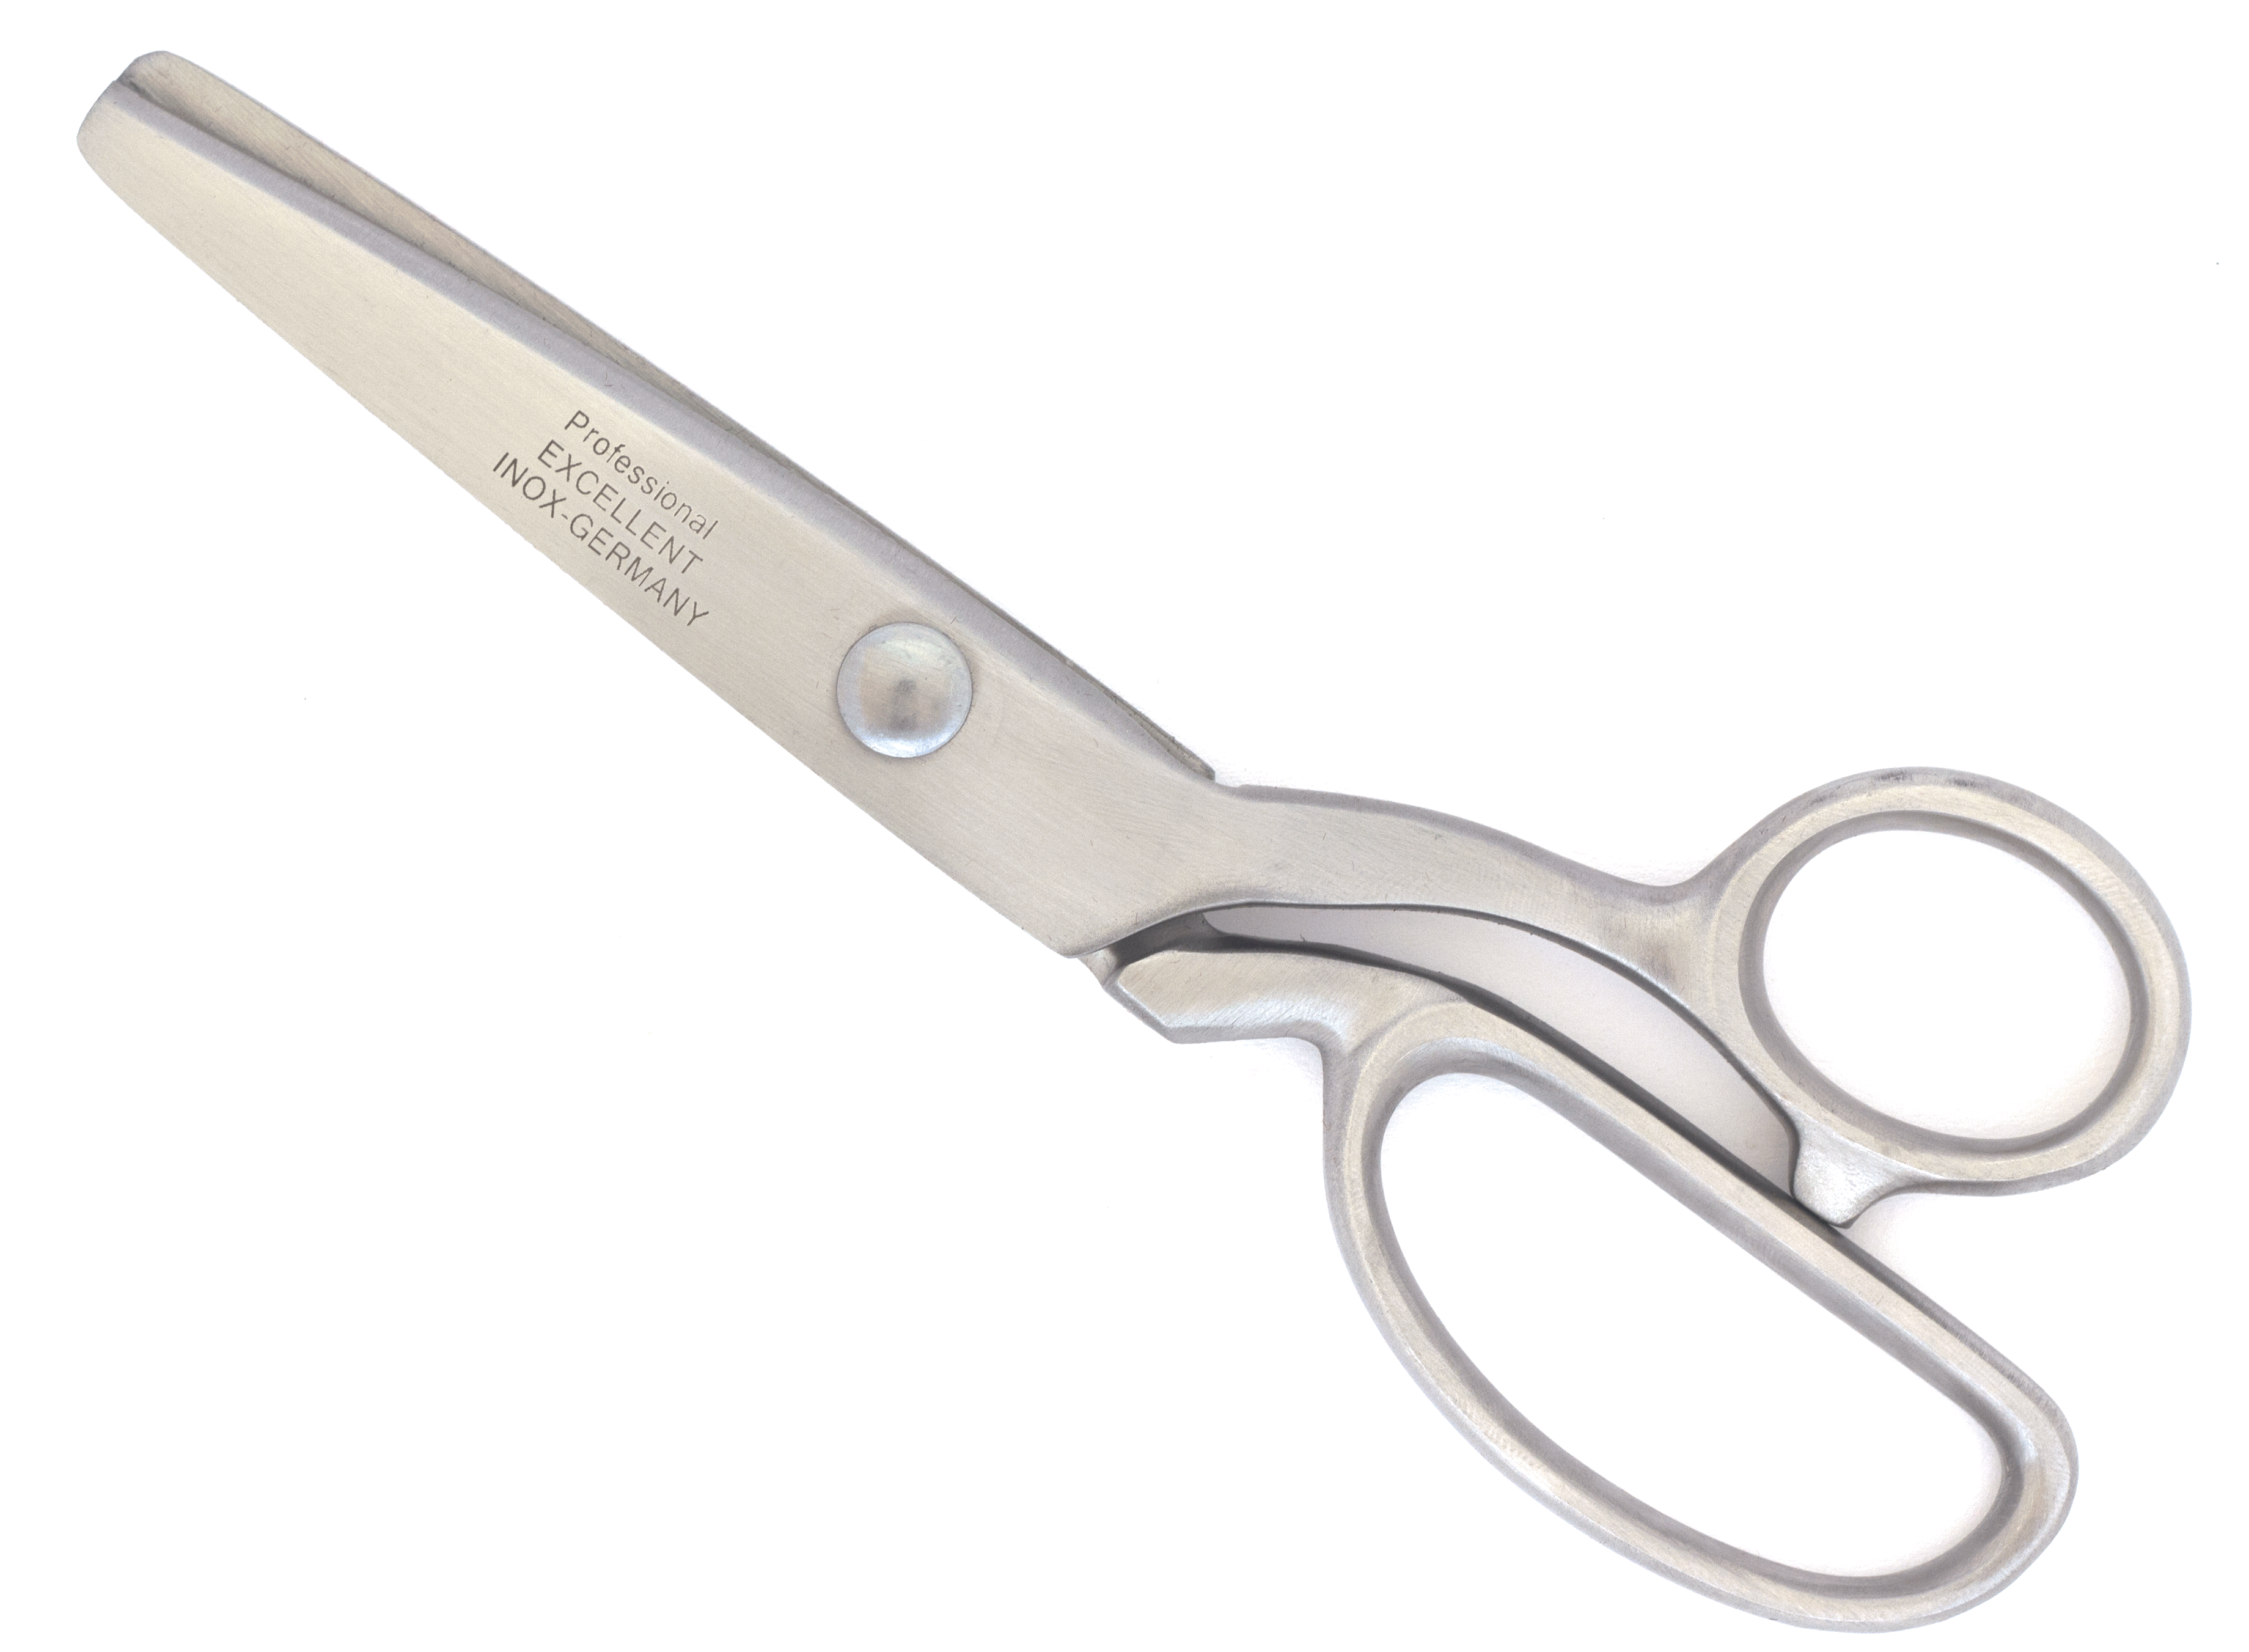 Excellent pinking shears 20 cm